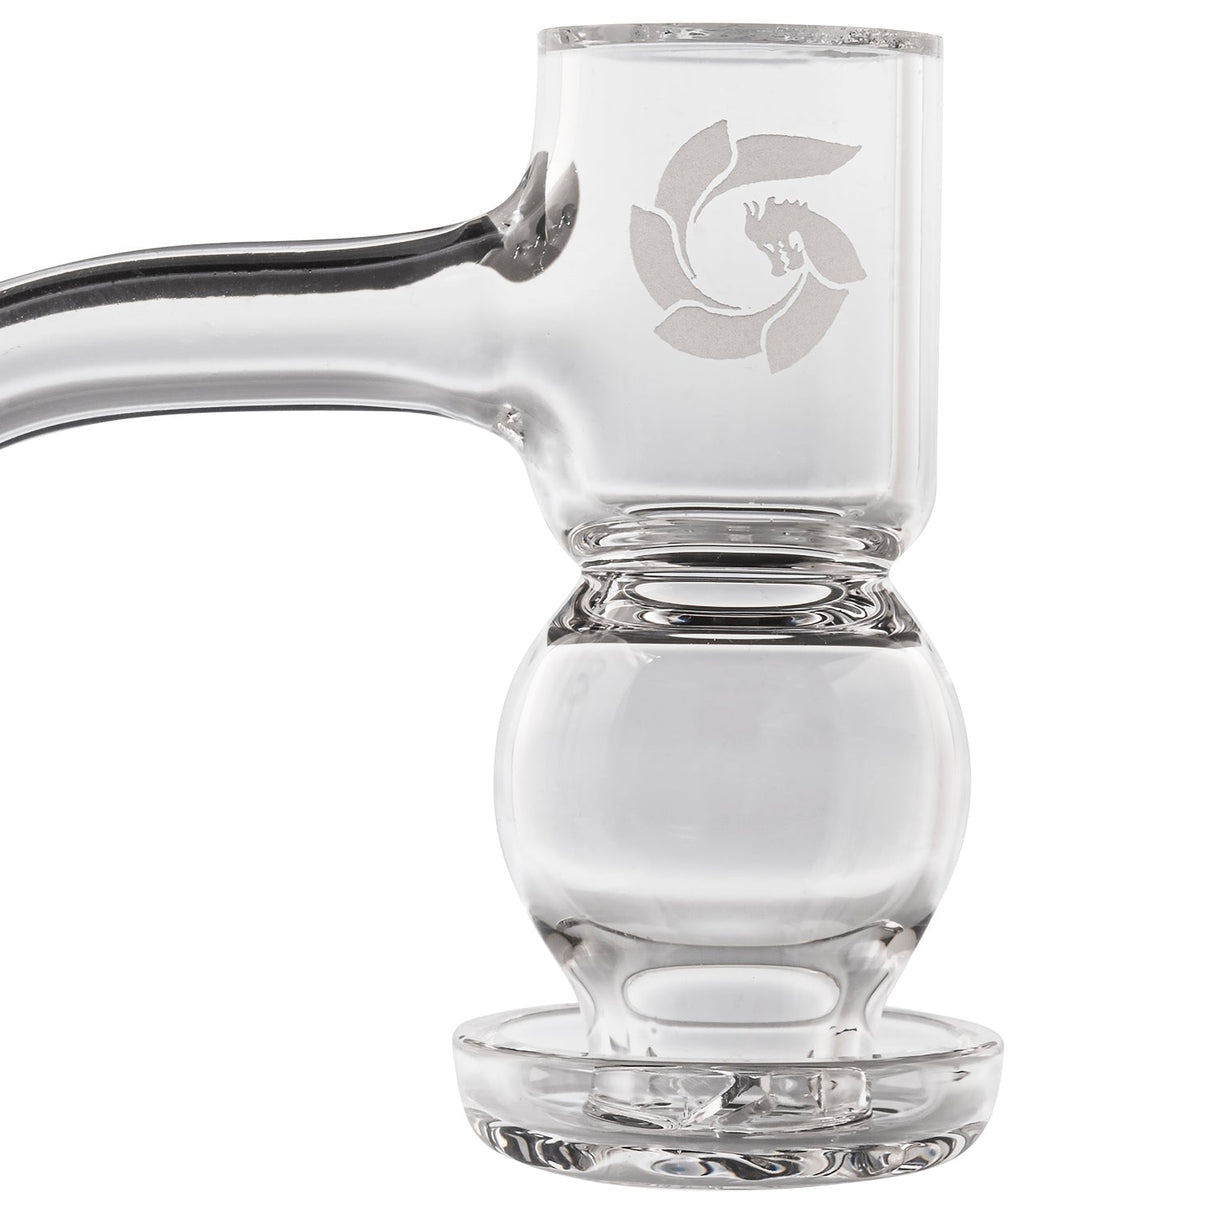 Glasshouse Egg Terp Banger with Beveled Top and Circular Pearl, 90 Degree Joint, Side View